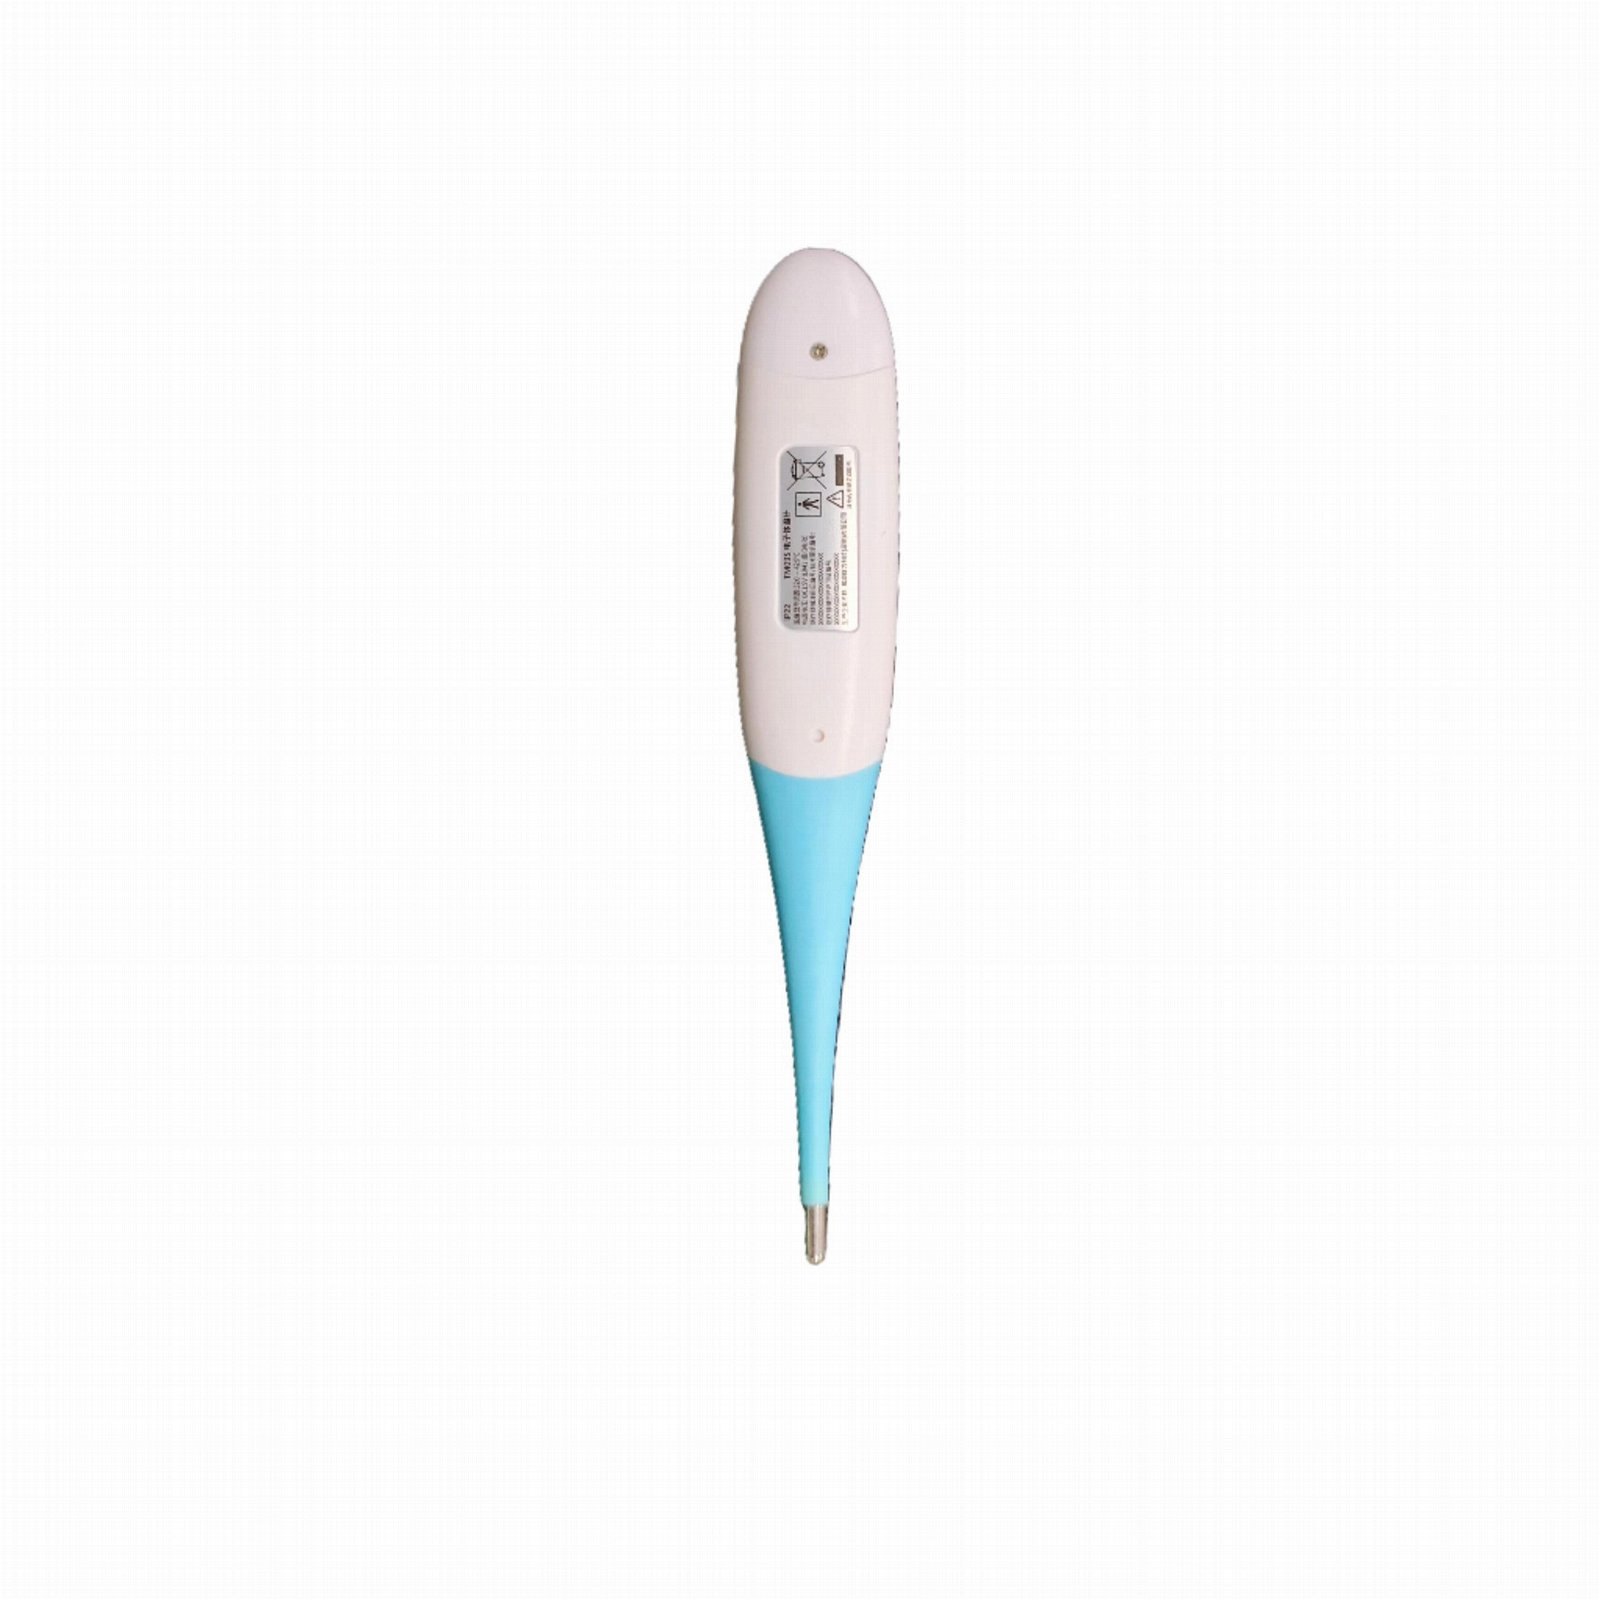 TM09S    Digital clinical thermometer 4